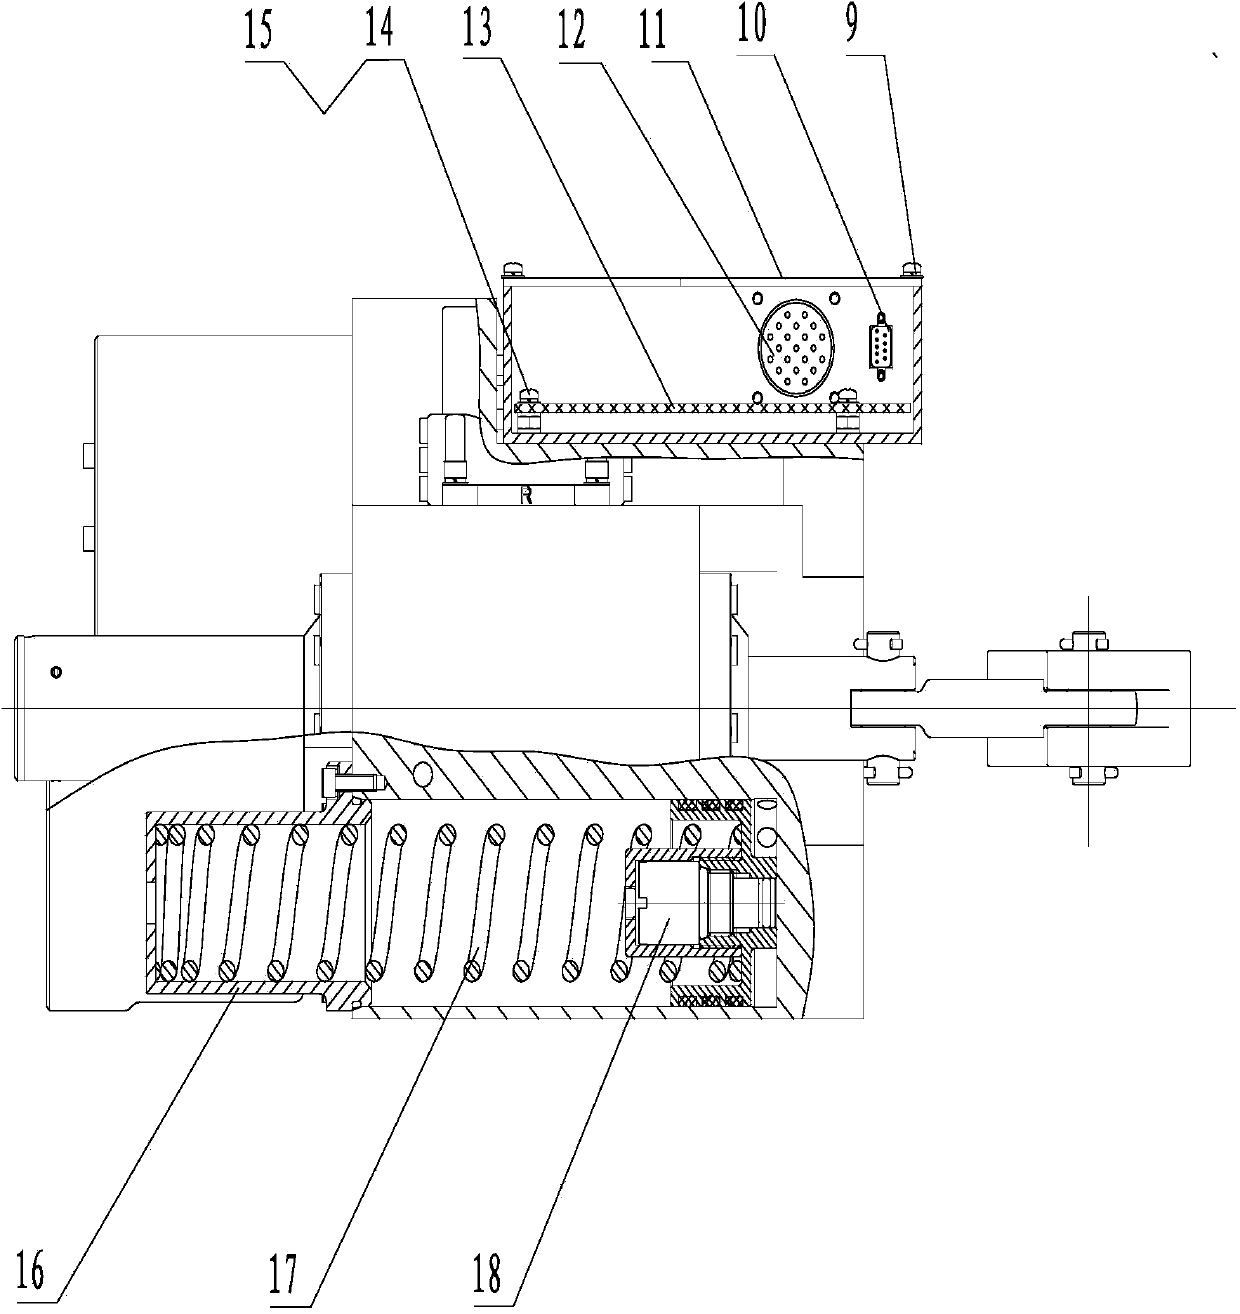 Integrated electro-hydraulic servo mechanism for cabin